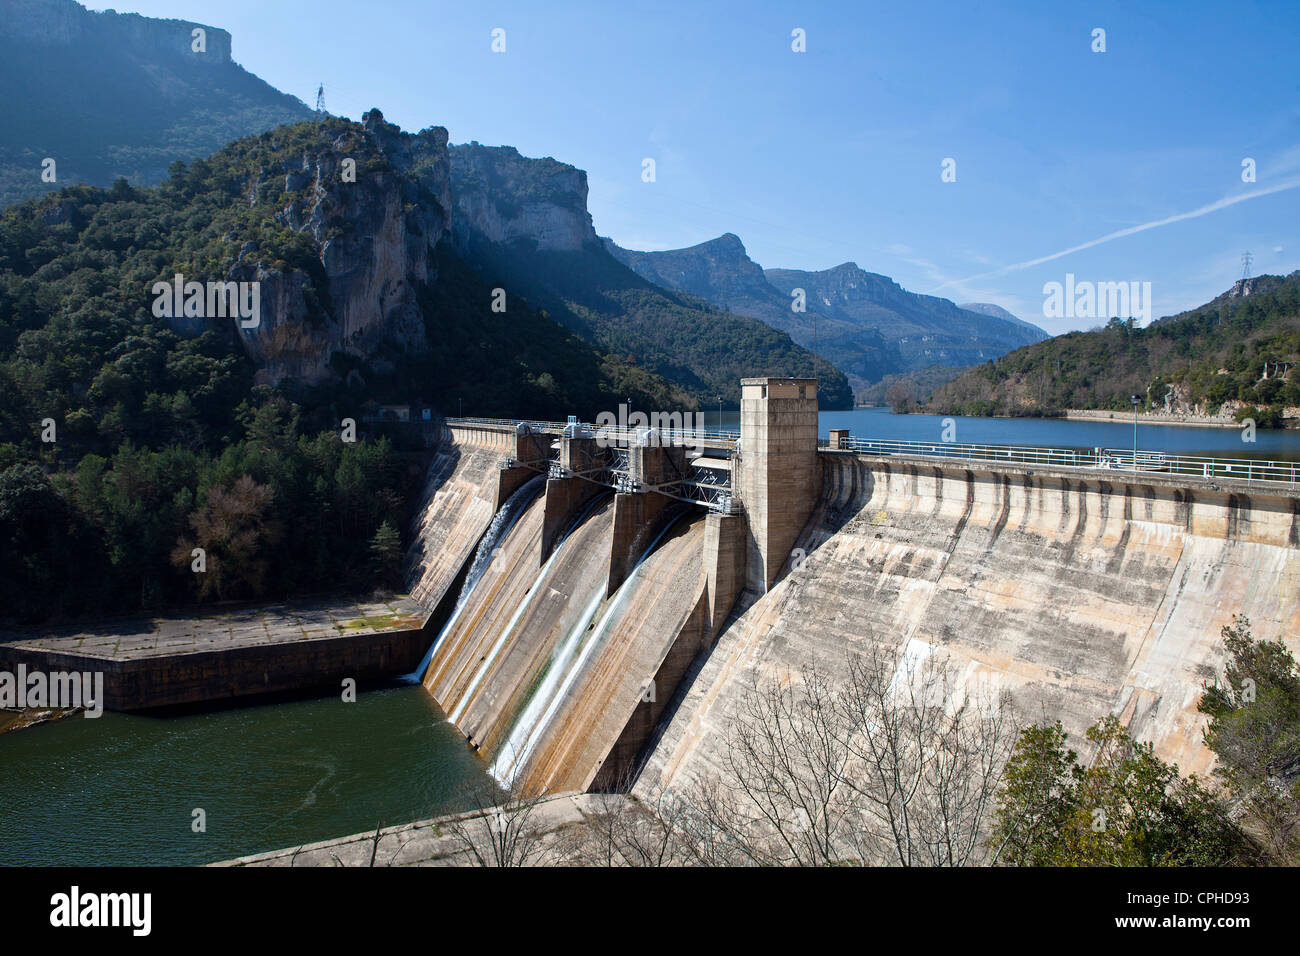 Spain, Europe, Burgos, Castile and Leon, Frias, Water, agriculture, architecture, Castile, dam, electricity, irrigation, lake, p Stock Photo